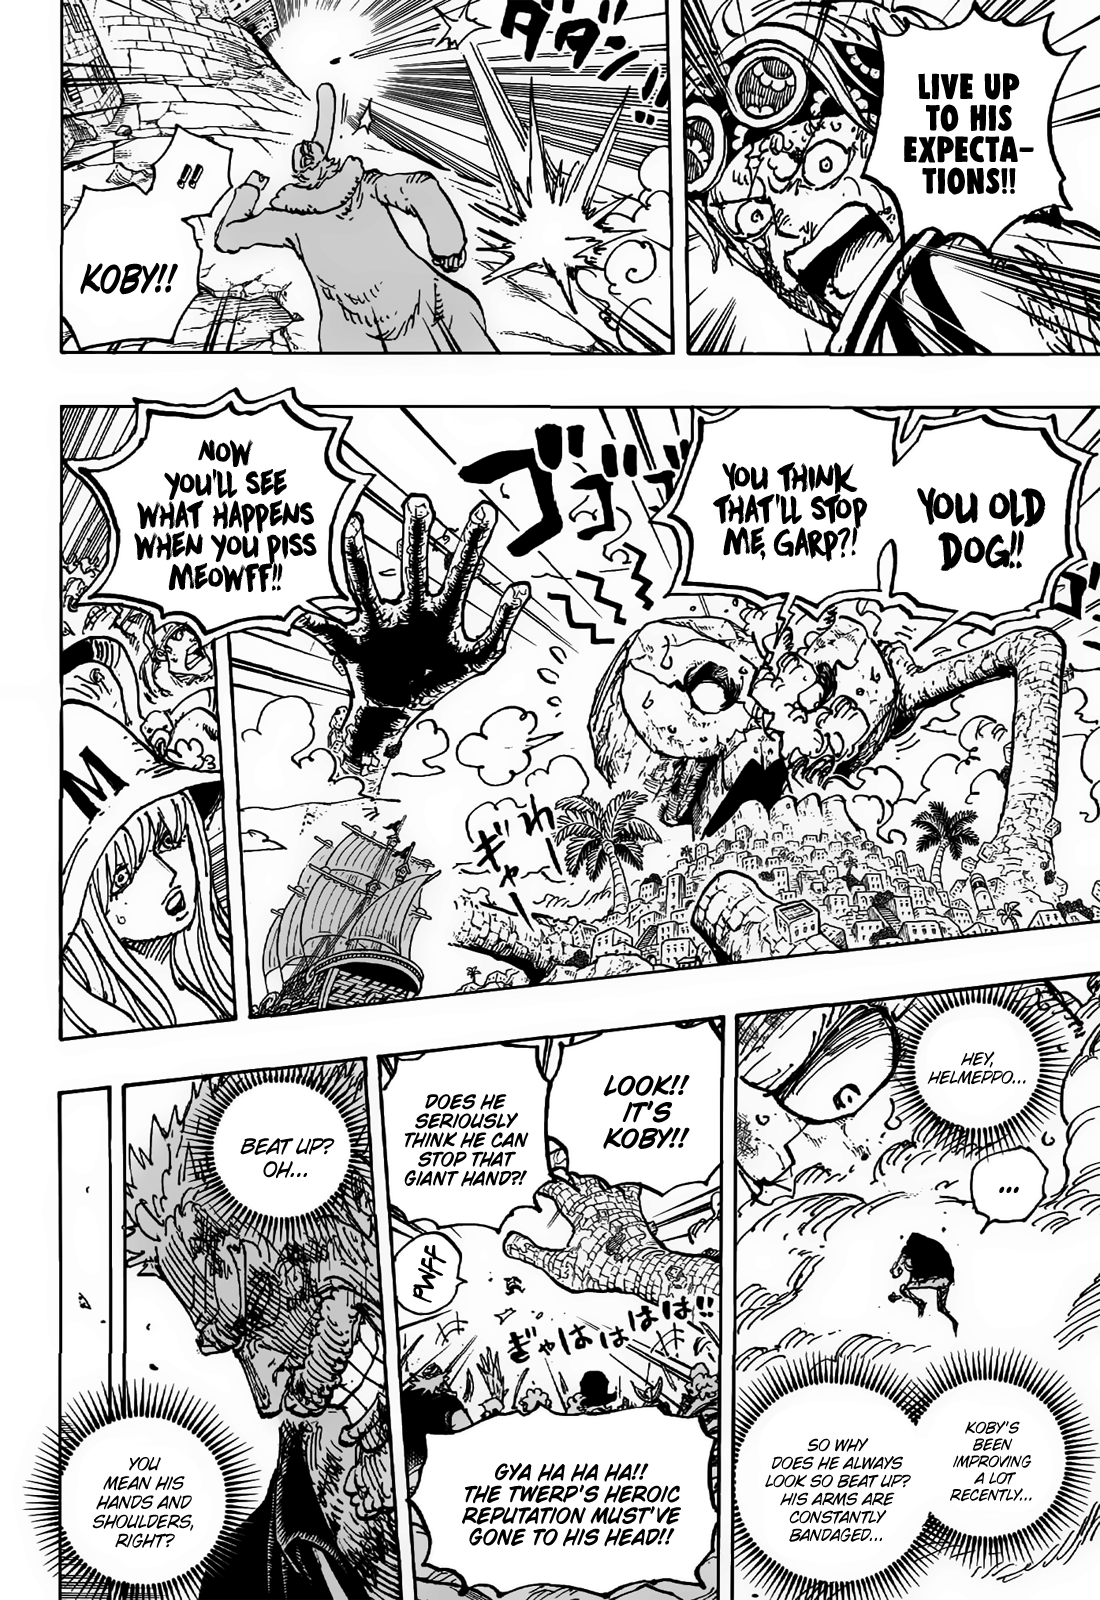 One Piece, Chapter 1058-1  TcbScans Org - Free Manga Online in High Quality